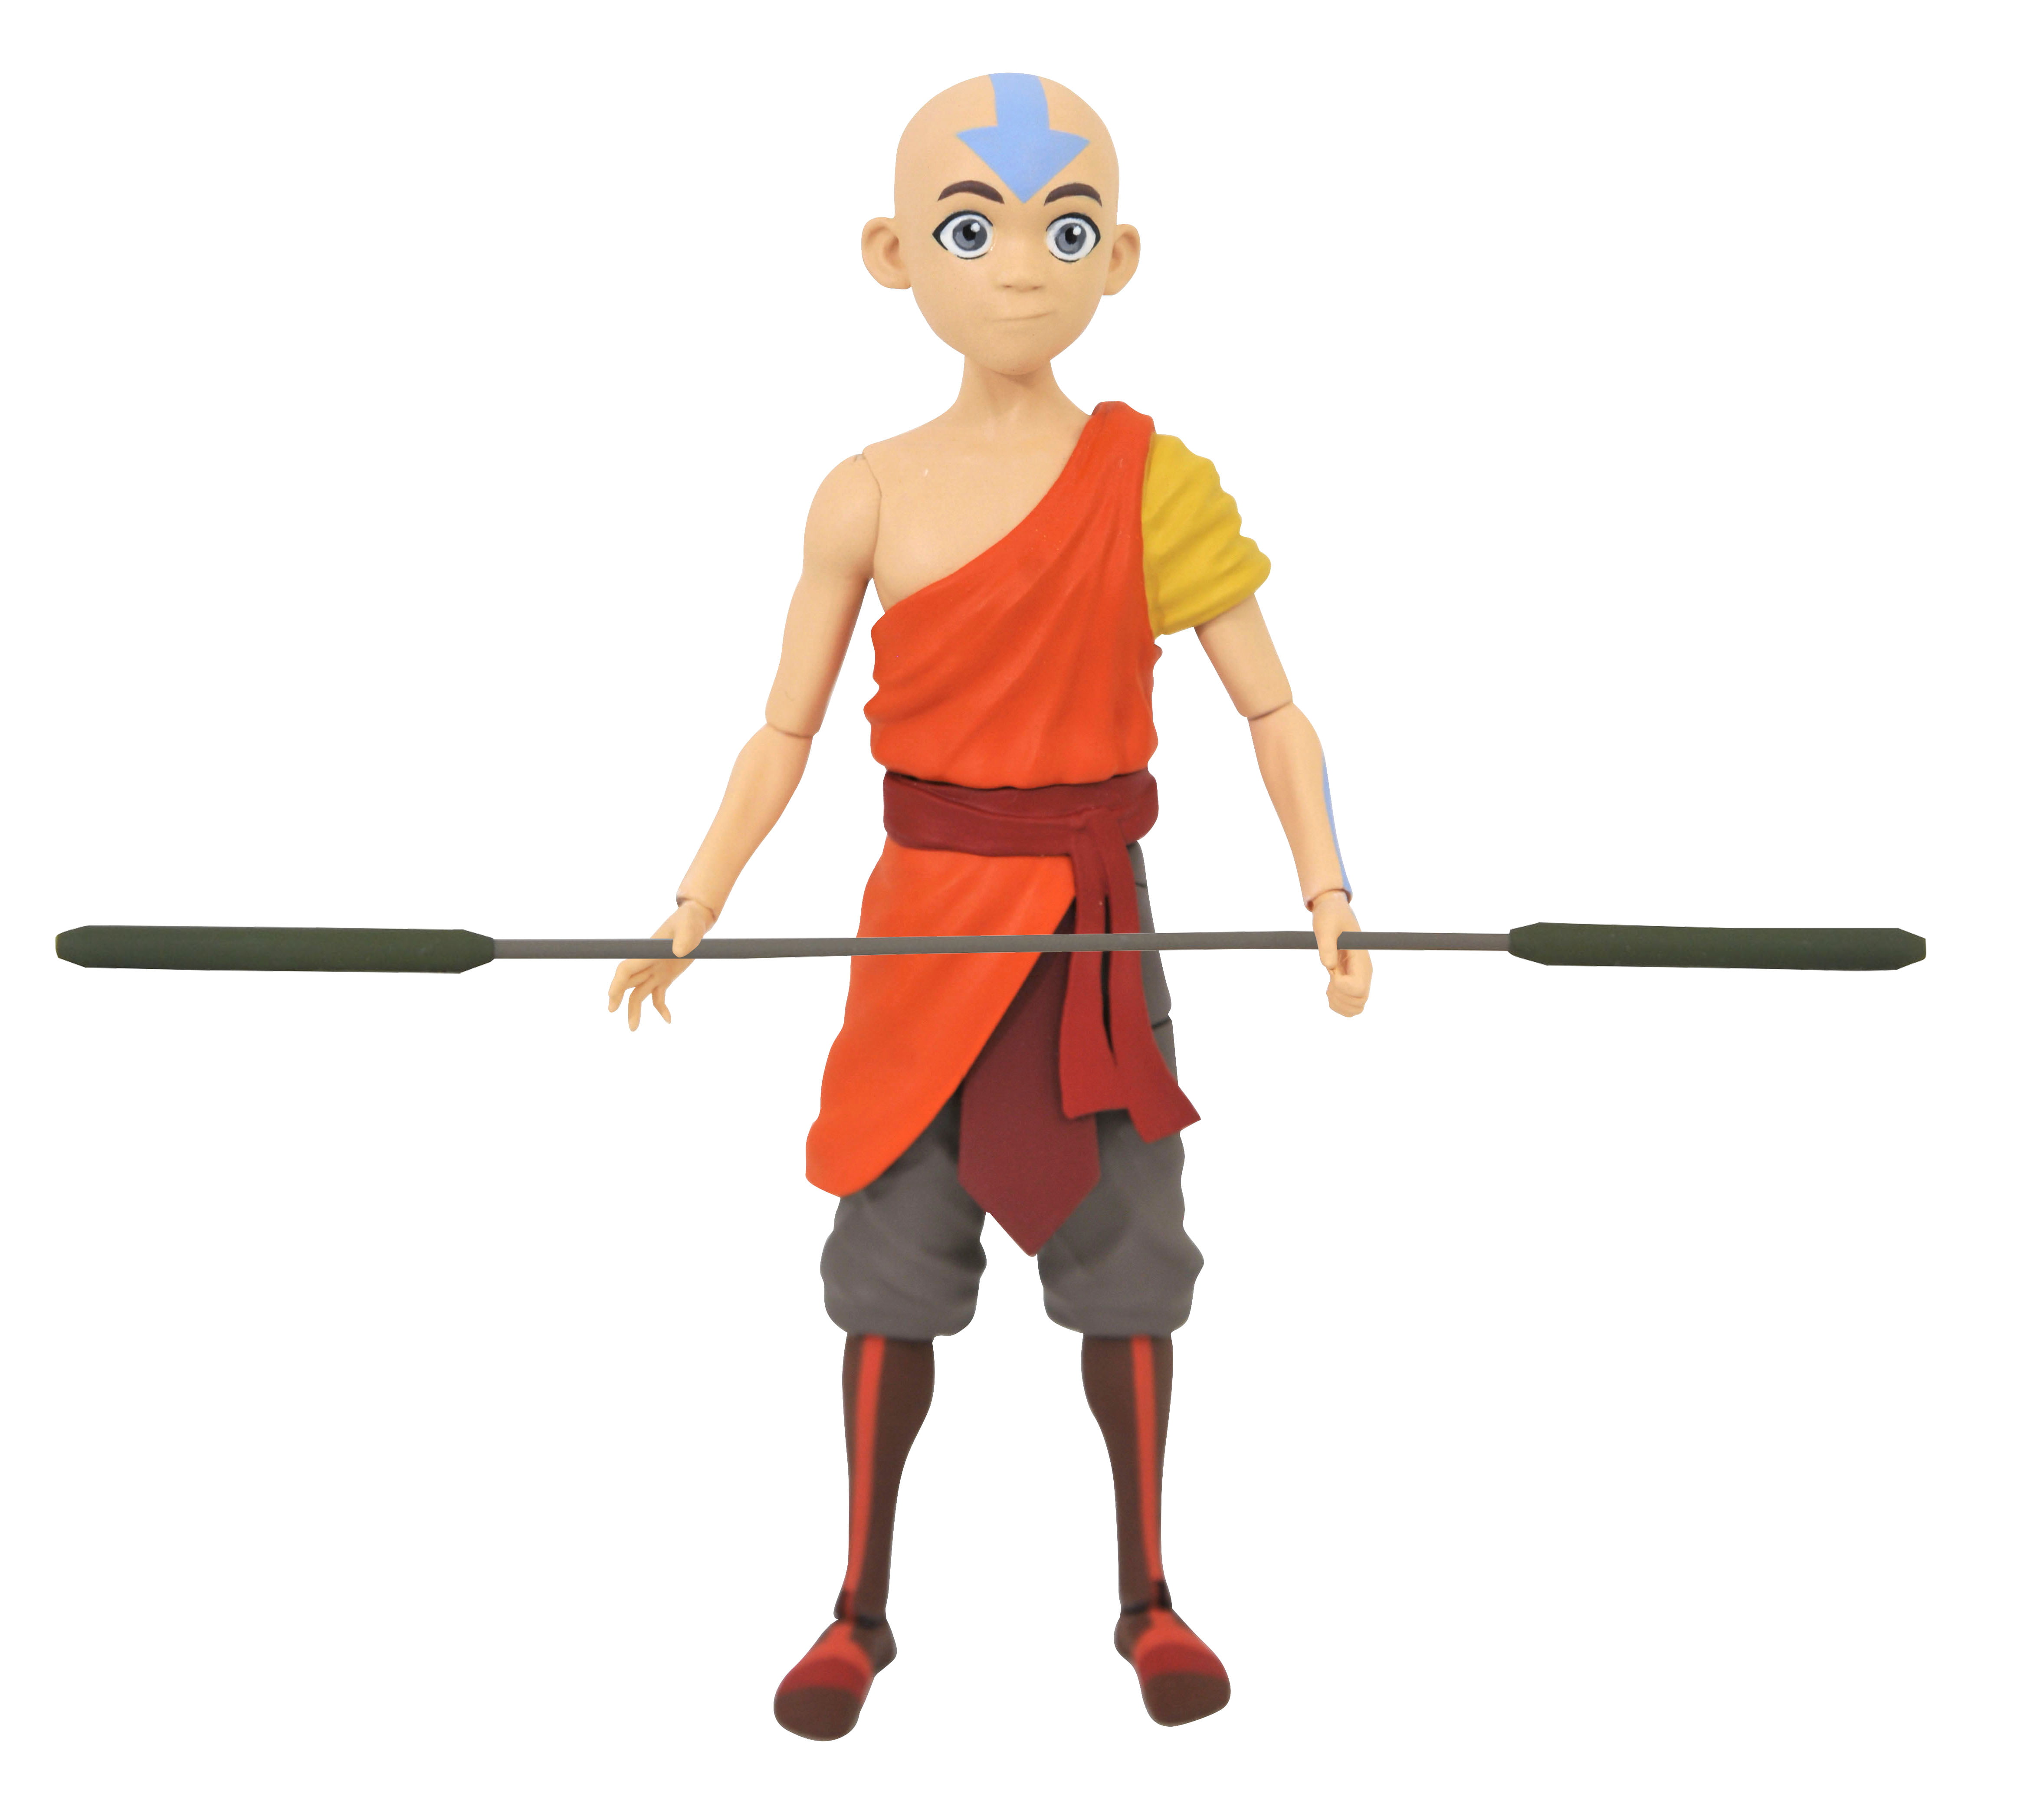 Avatar The Last Airbender Aang Action Figure 